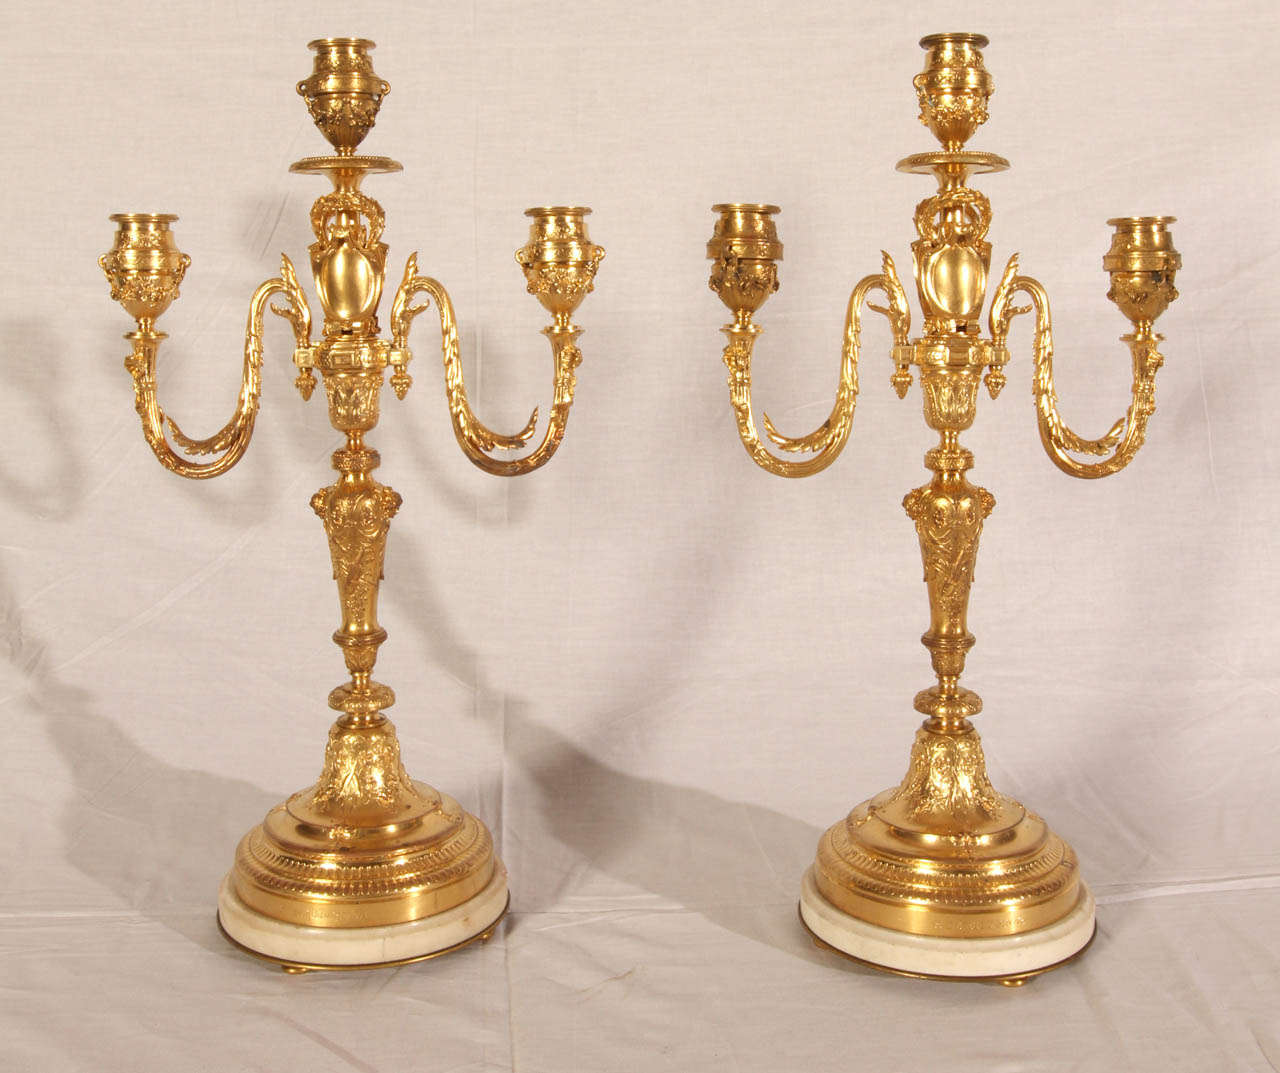 Pair of Napoleon III period candelabras in gilded brass with three light arms. White marble base. Very good condition. Normal wear consistent with age and use.